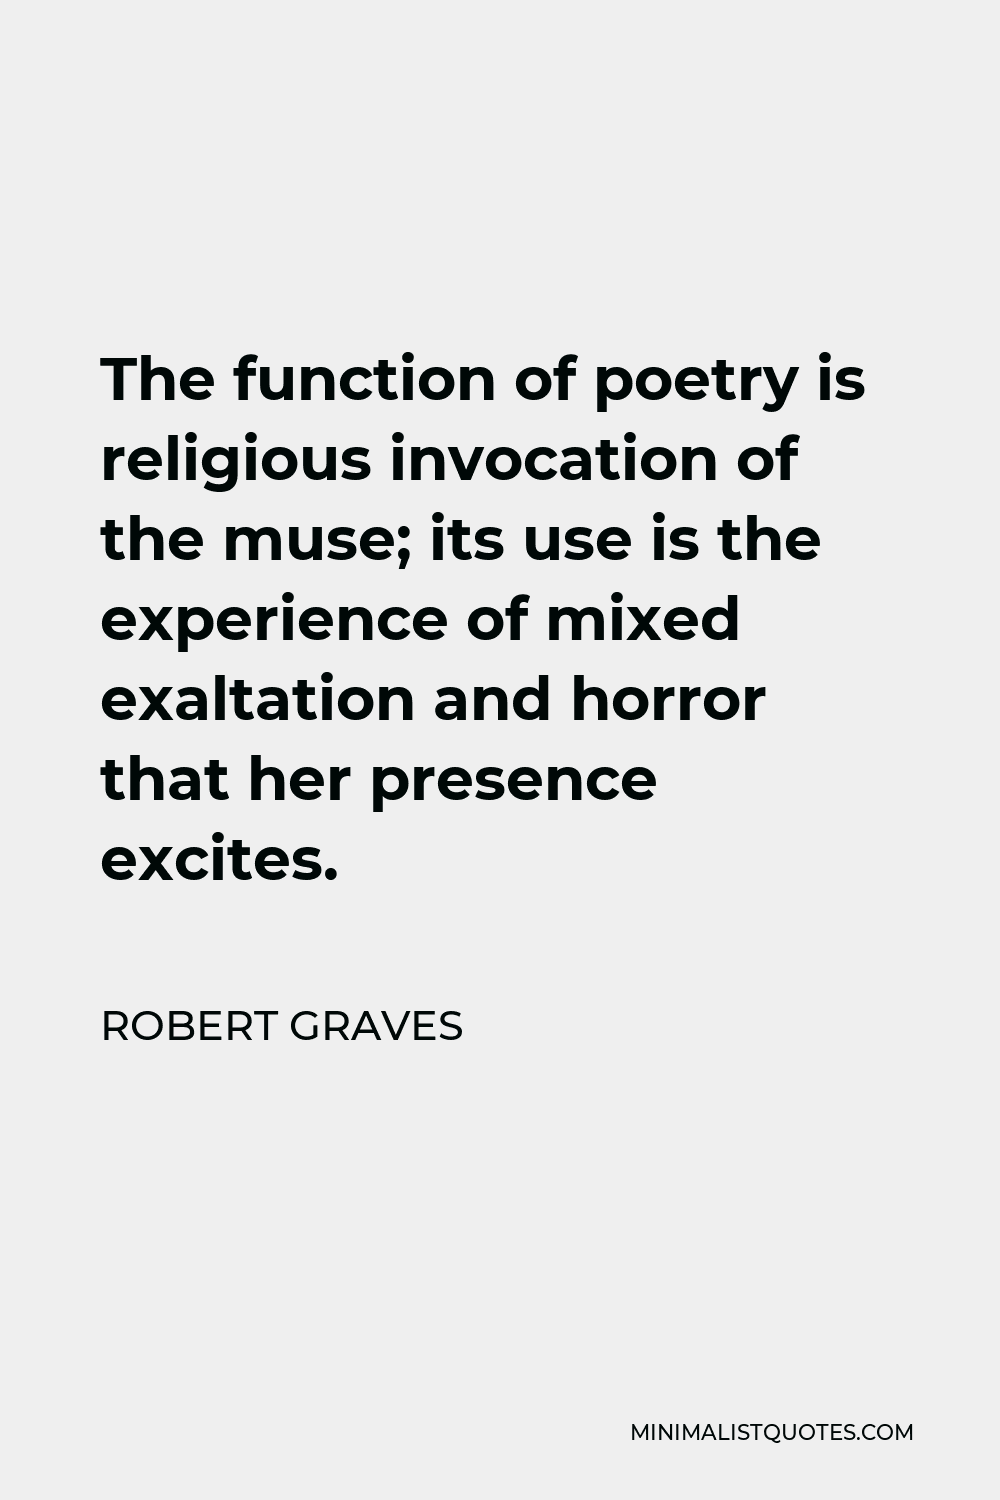 Robert Graves Quote - The function of poetry is religious invocation of the muse; its use is the experience of mixed exaltation and horror that her presence excites.